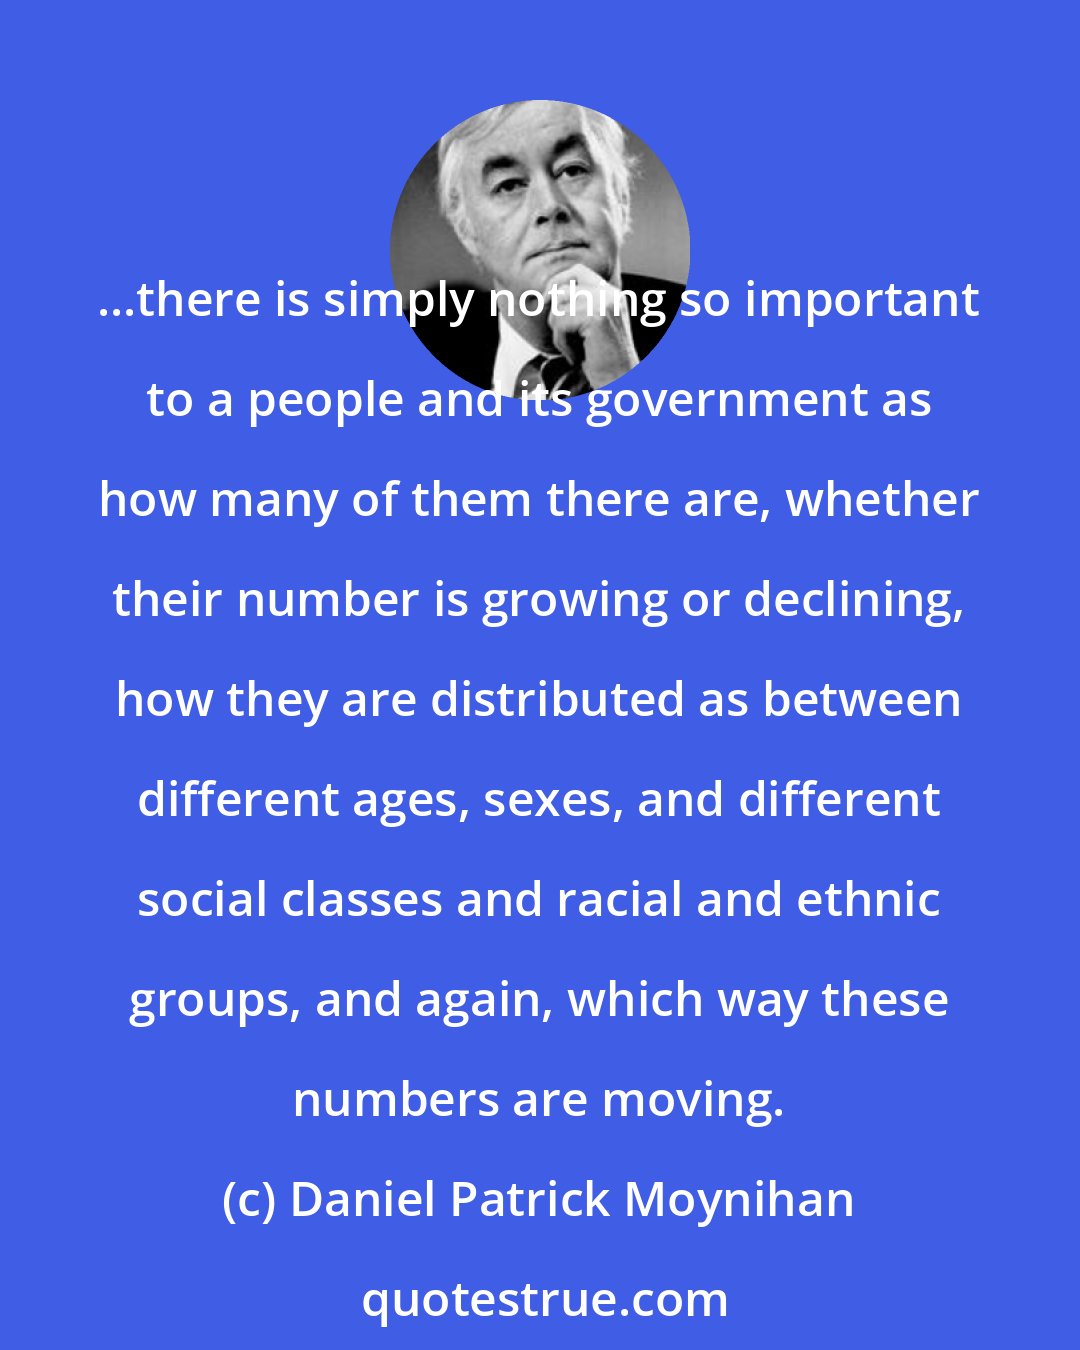 Daniel Patrick Moynihan: ...there is simply nothing so important to a people and its government as how many of them there are, whether their number is growing or declining, how they are distributed as between different ages, sexes, and different social classes and racial and ethnic groups, and again, which way these numbers are moving.